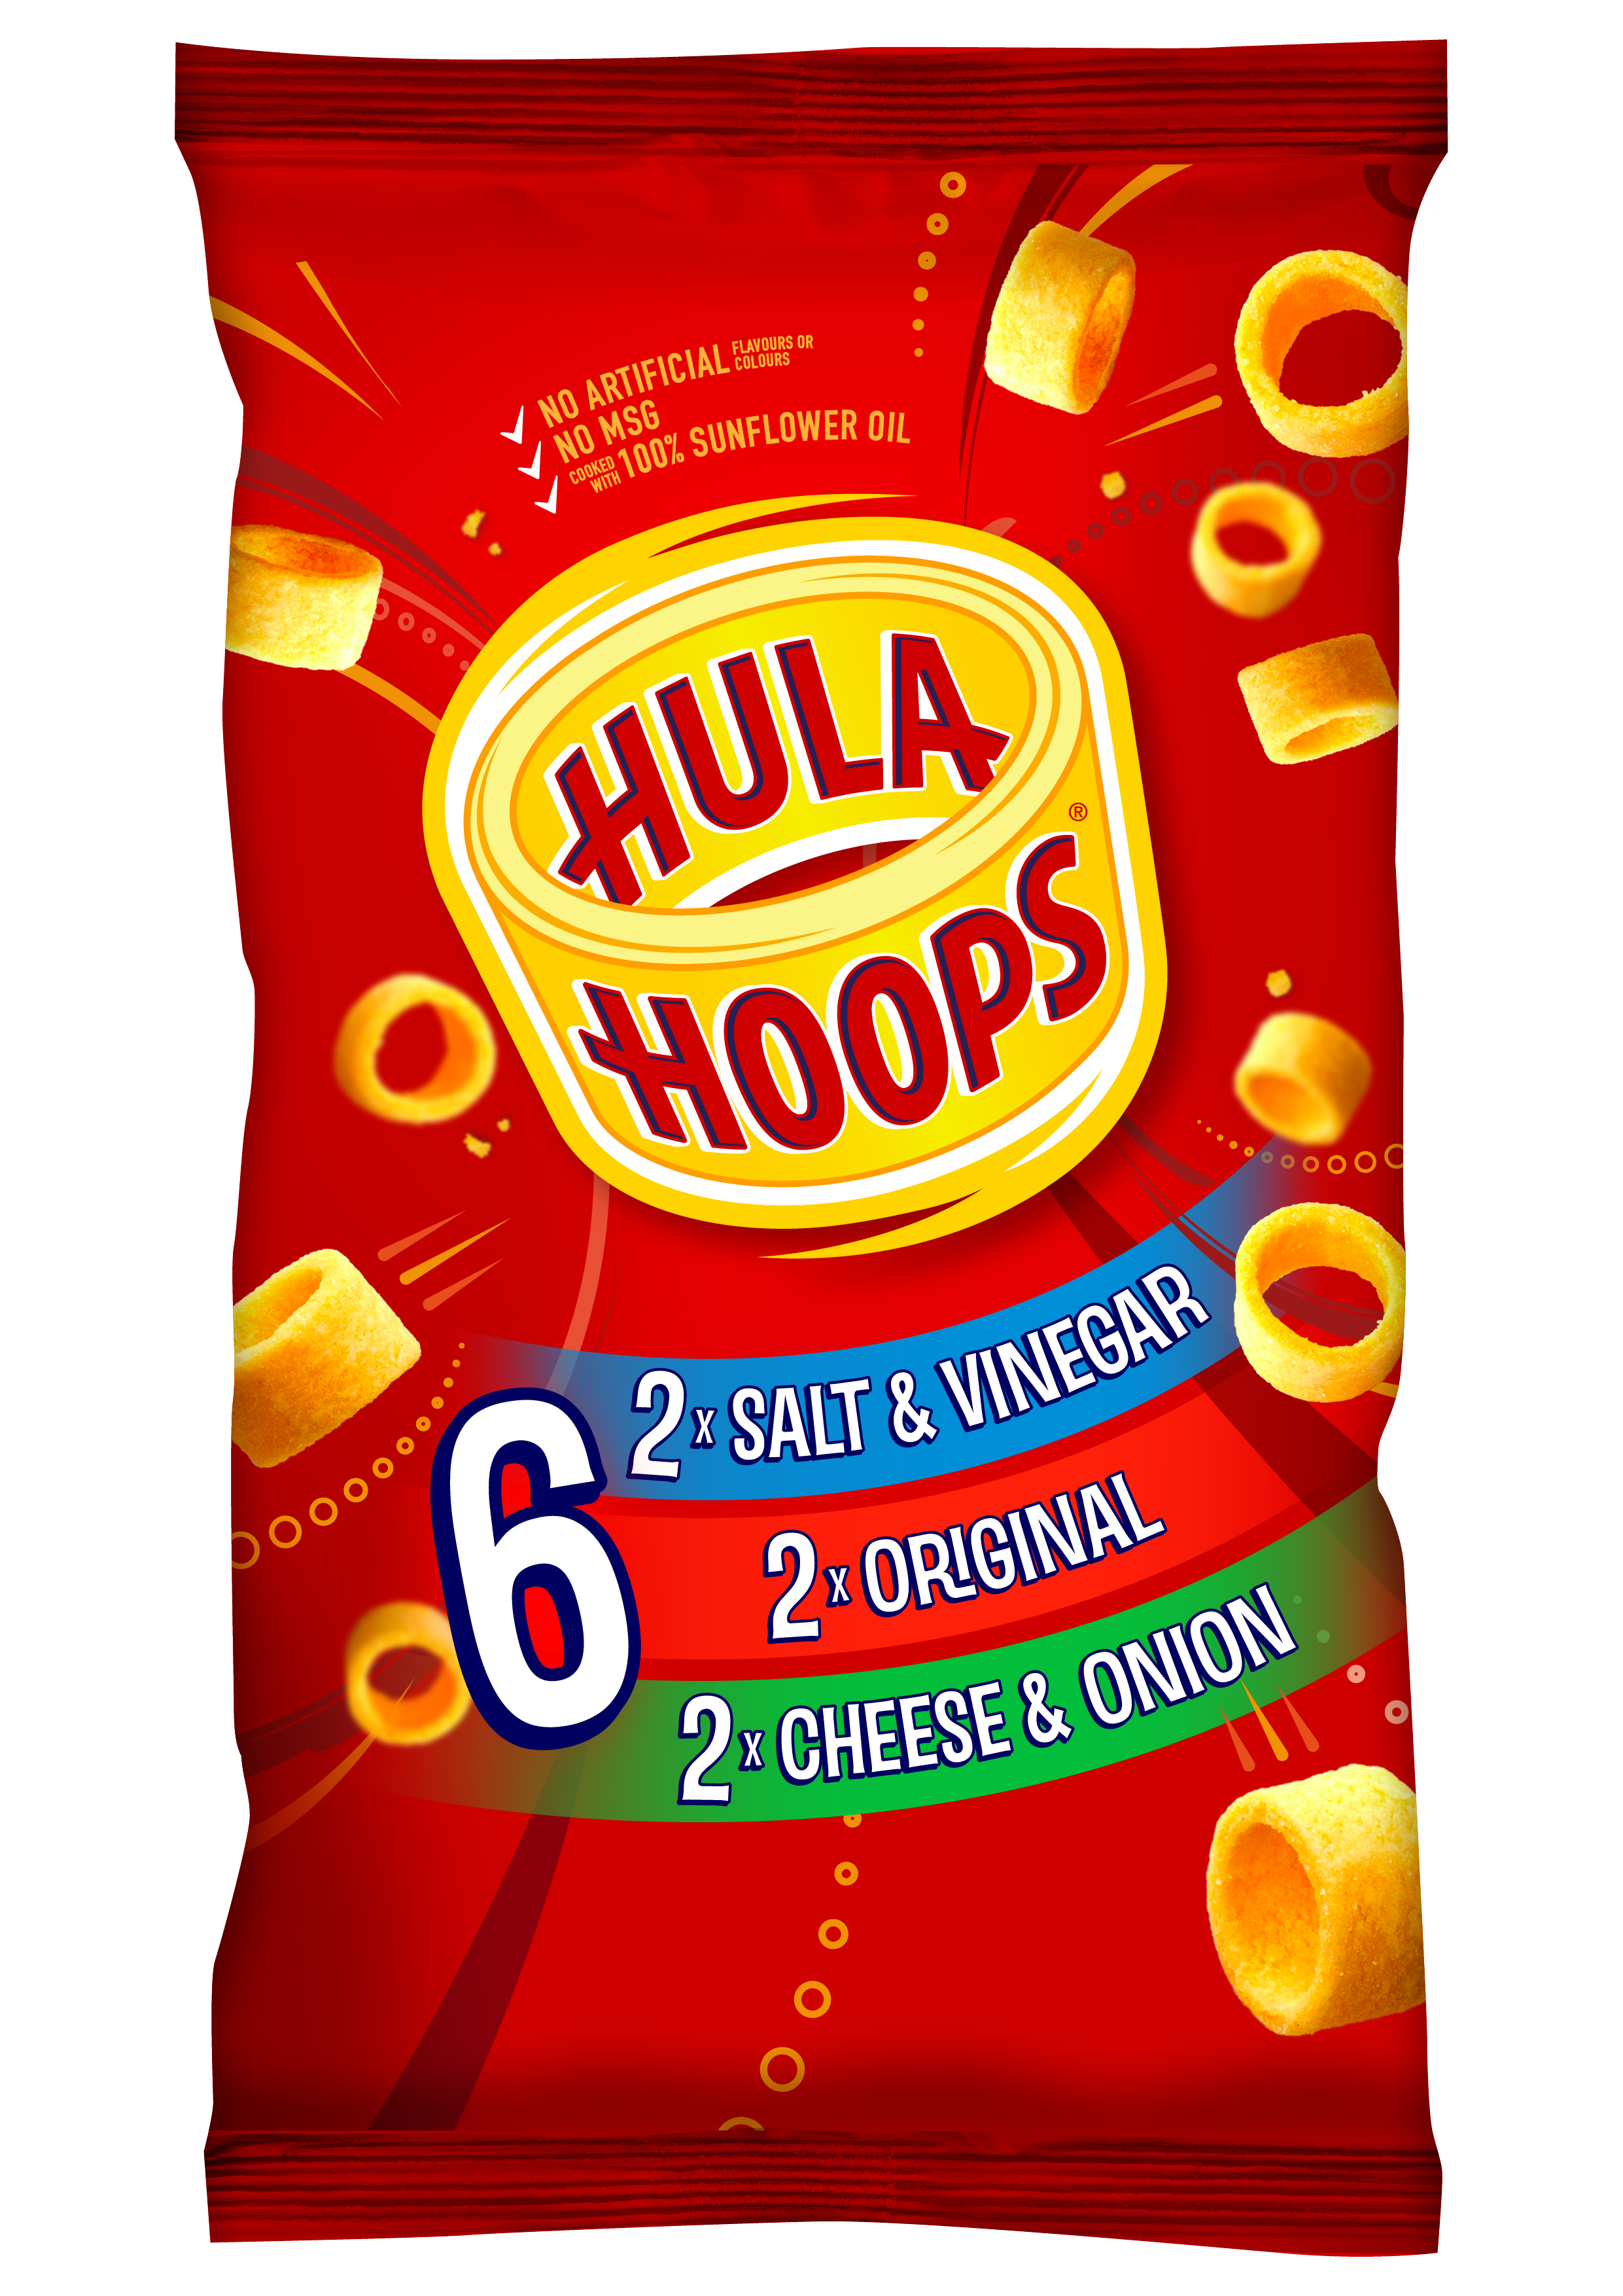 Hula Hoops unveils bold new packaging update